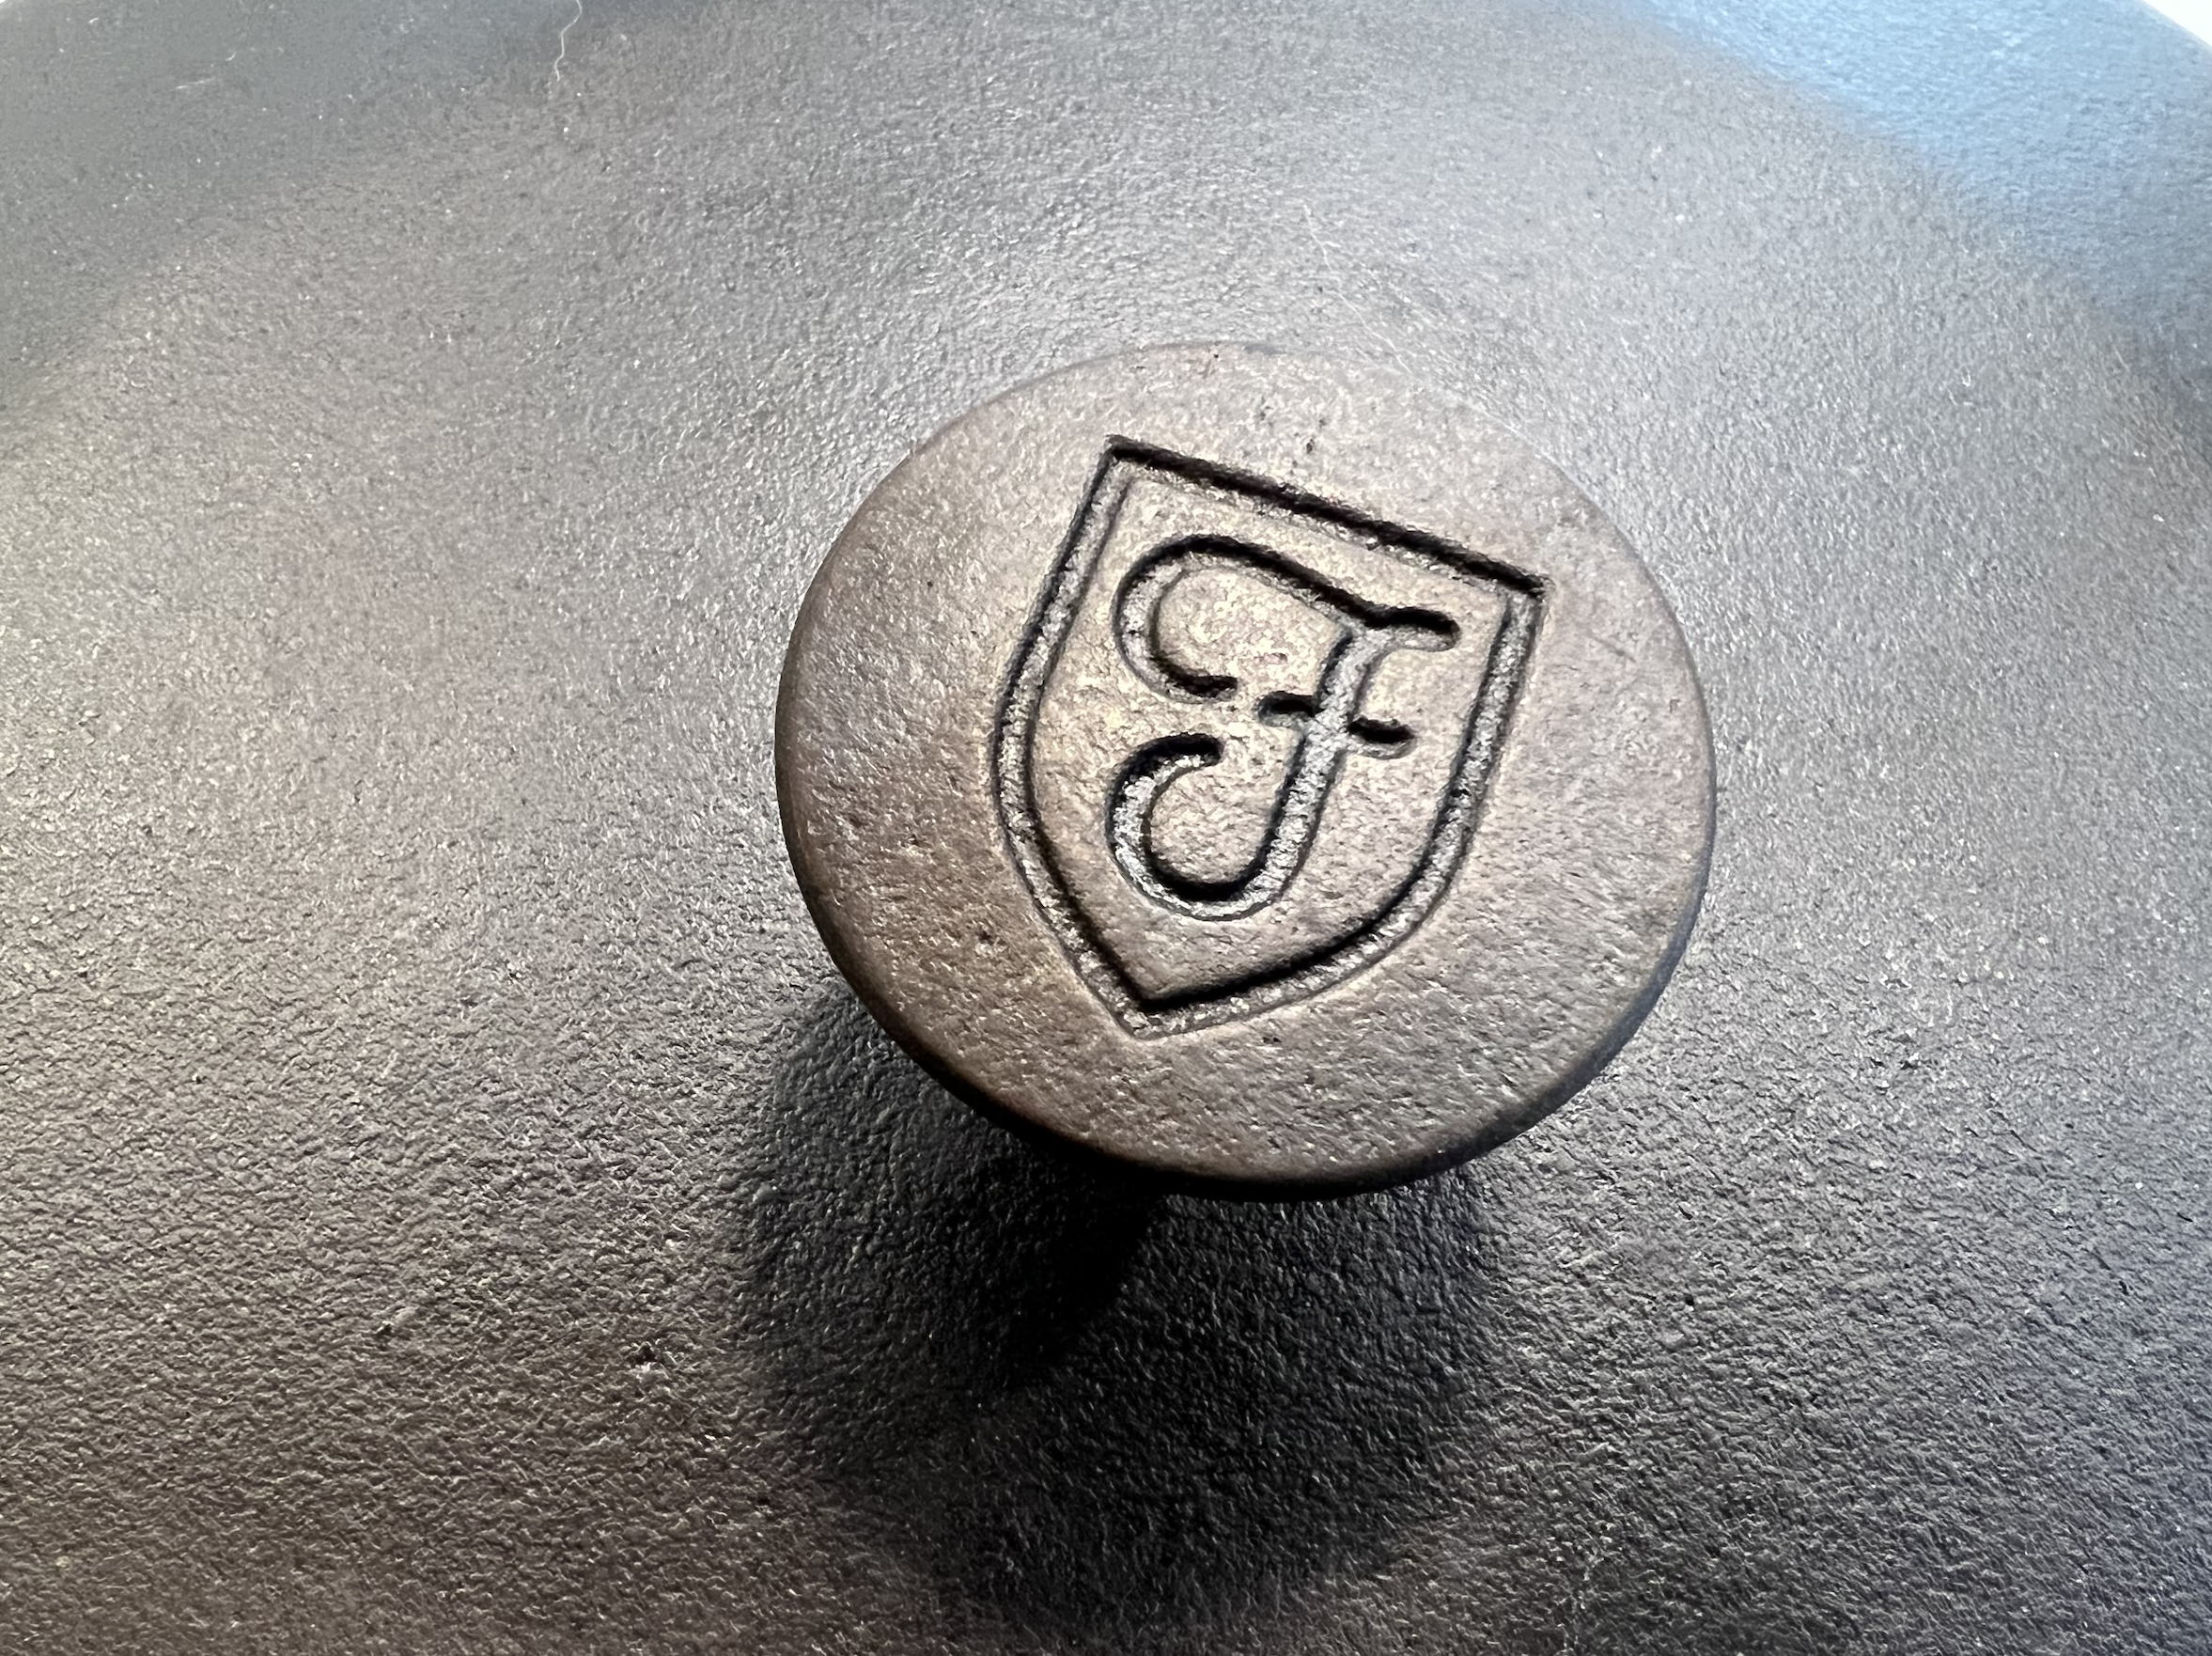 sourdough product review field company dutch oven handmade of cast iron in the united states of america 2